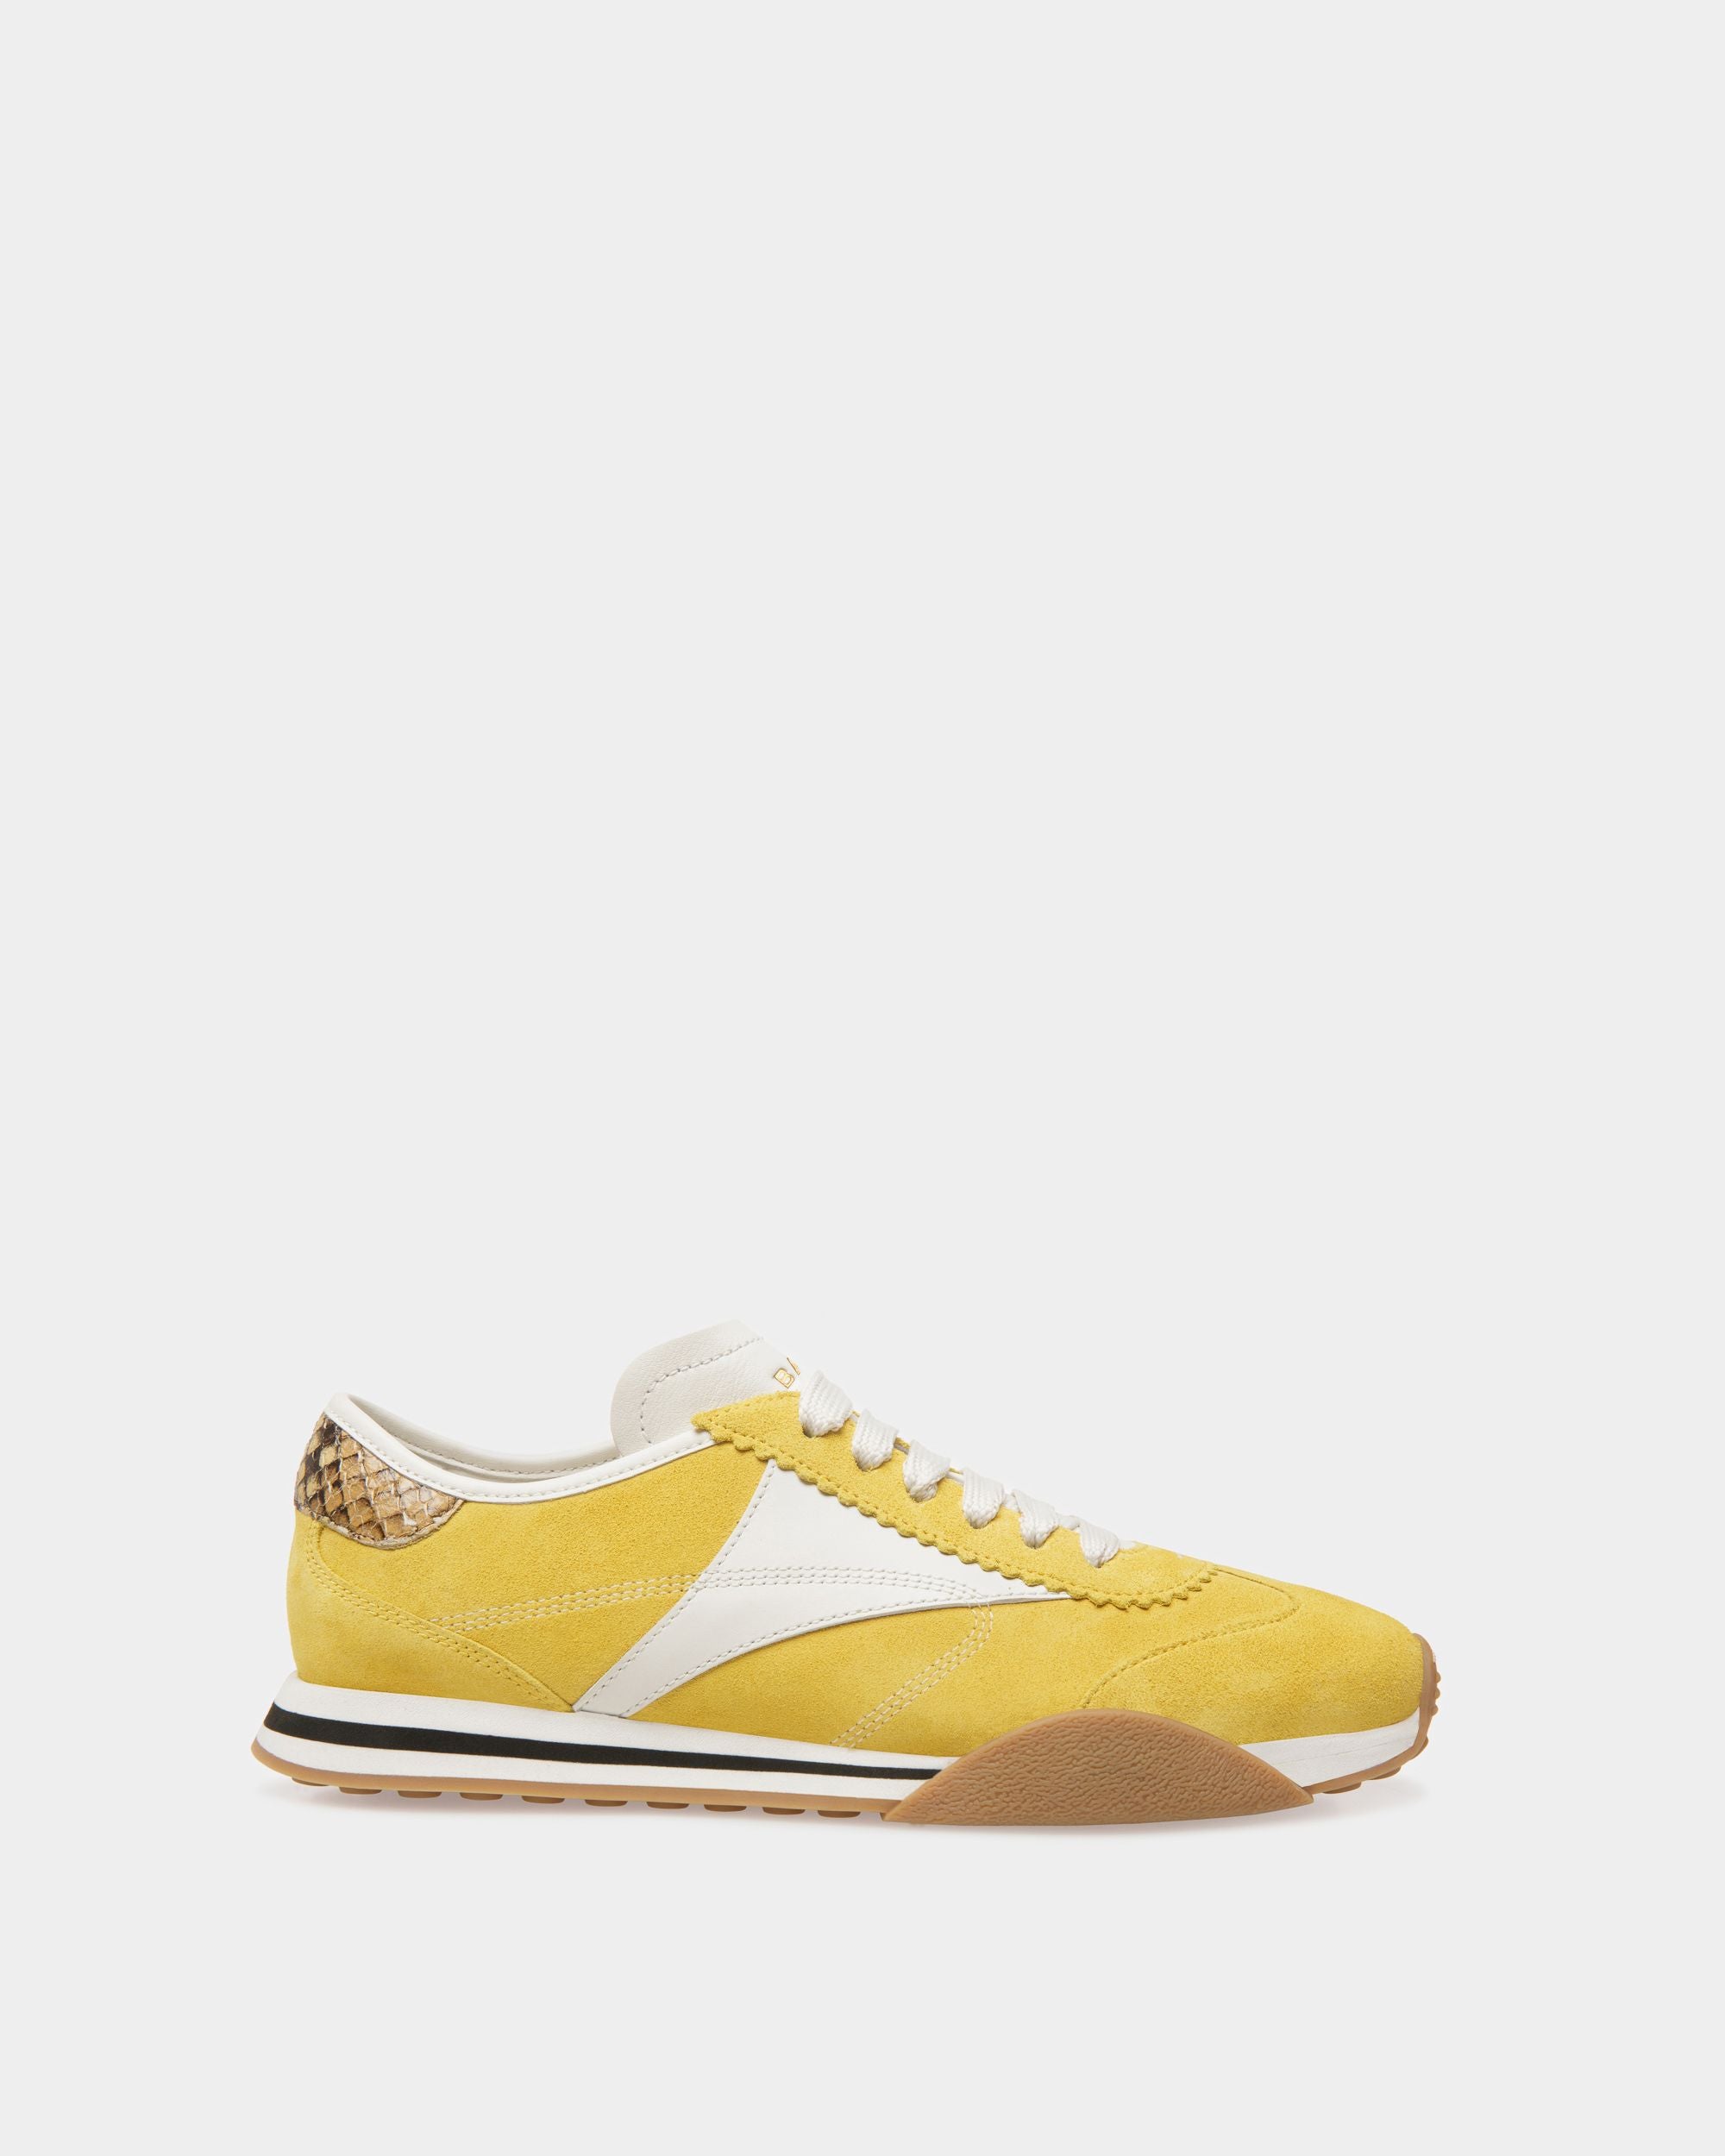 Sonney | Women's Sneakers | Yellow And White Leather | Bally | Still Life Side